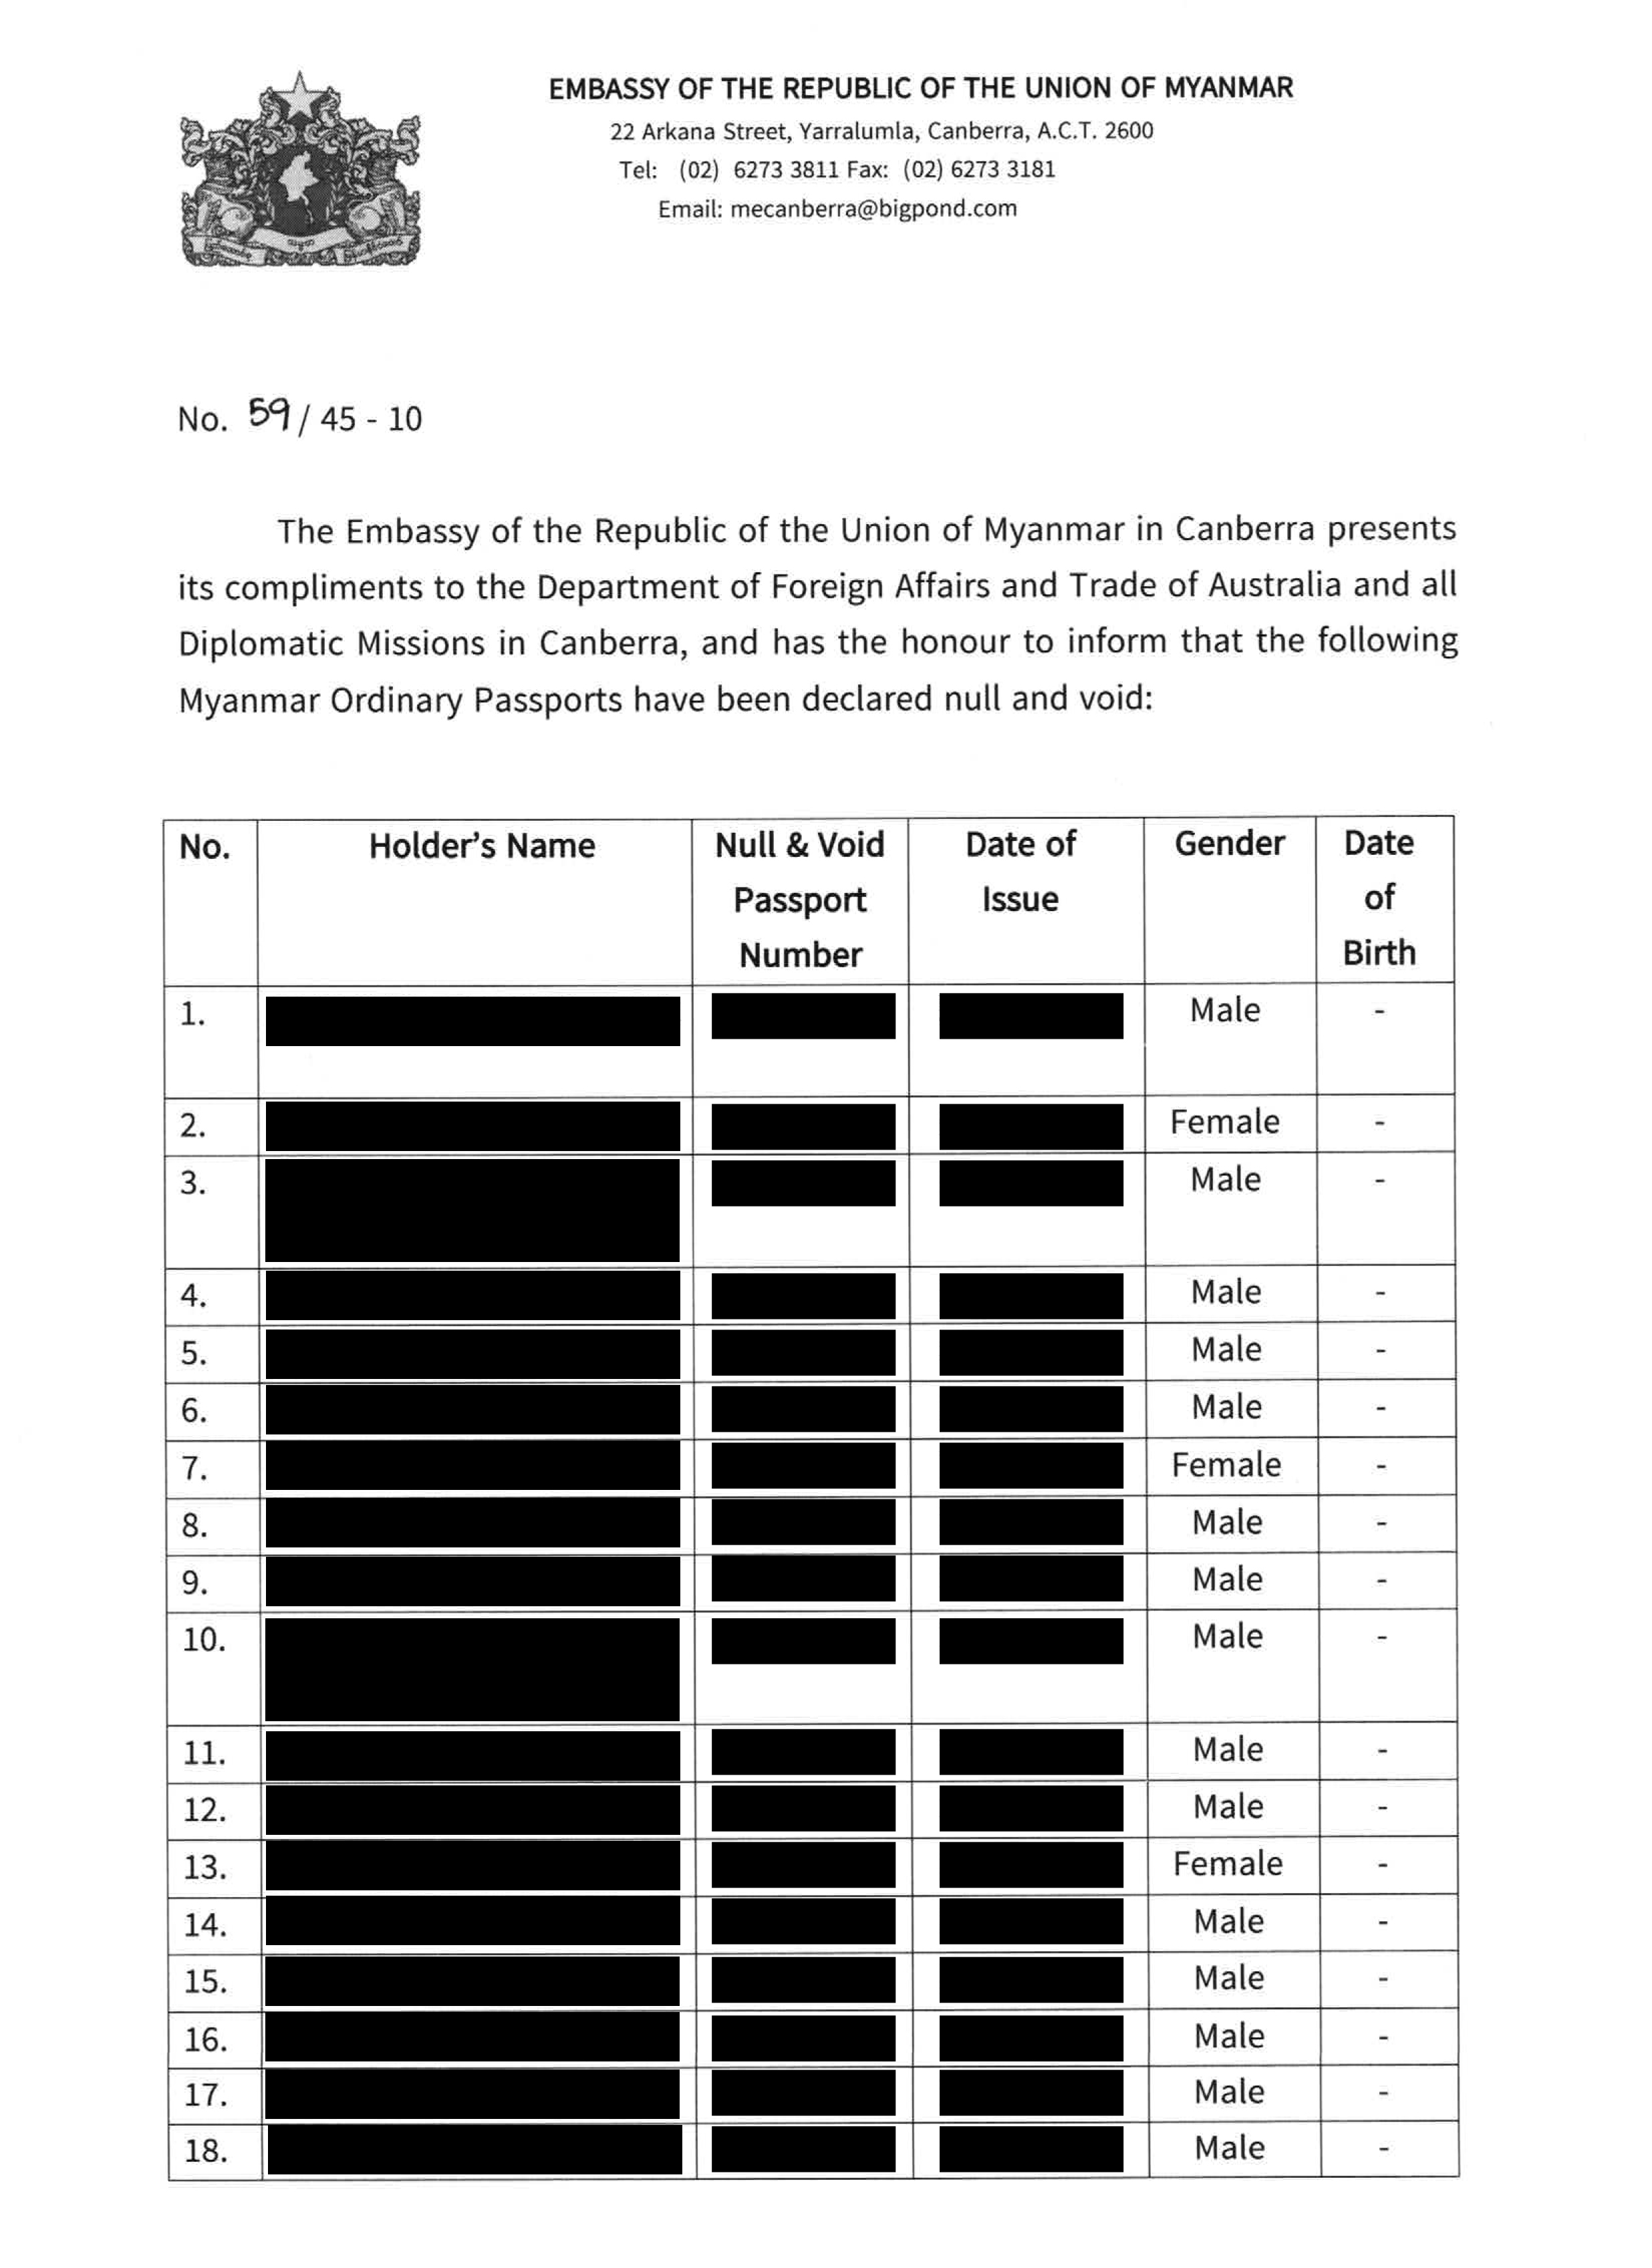 A document form the Myanmar embassy showing a list of names with other details redacted.